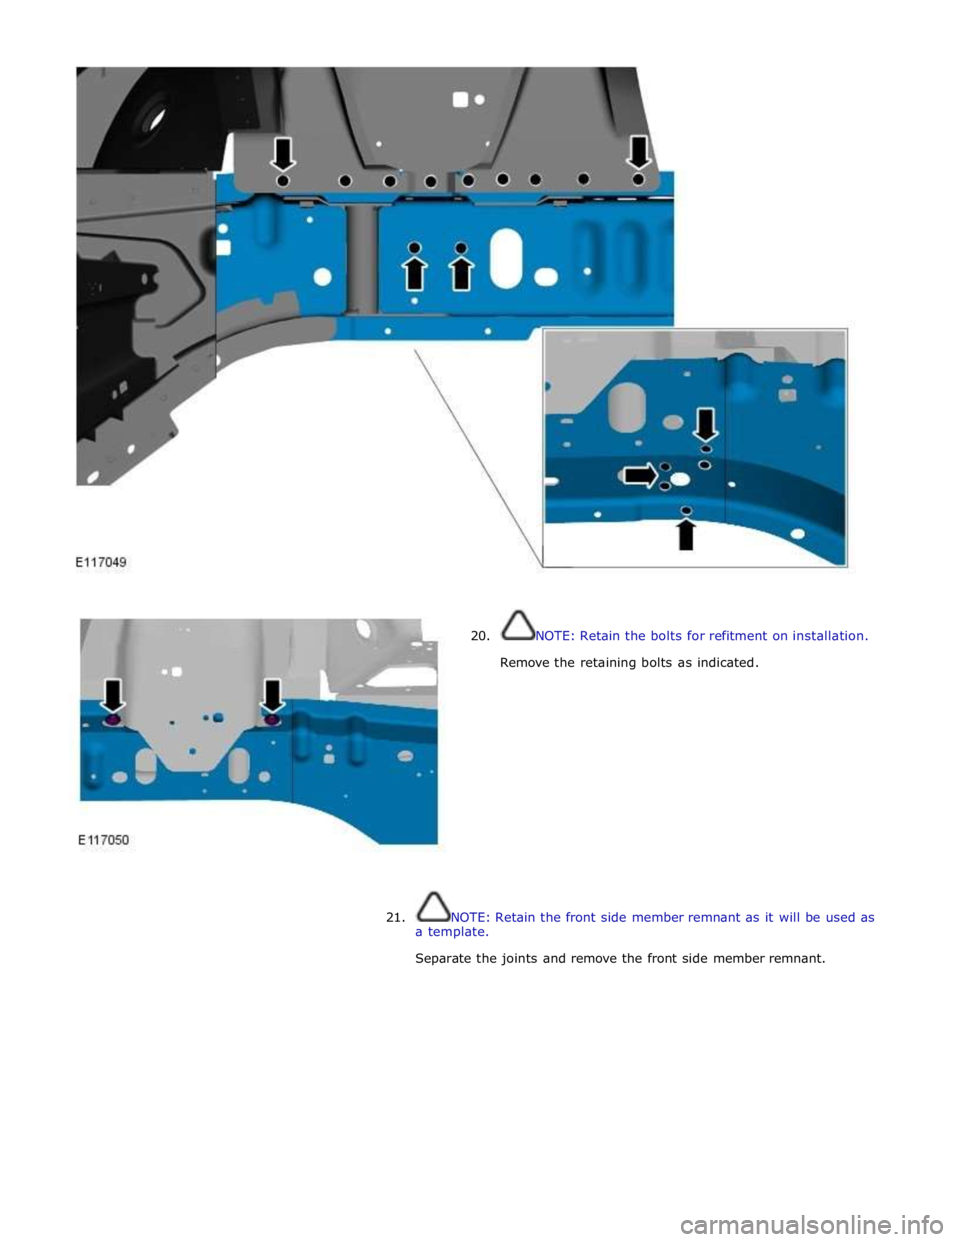 JAGUAR XFR 2010 1.G Workshop Manual  
 
 
 
20. NOTE: Retain the bolts for refitment on installation. 
 
Remove the retaining bolts as indicated. 
 
 
 
 
 
 
 
 
 
 
 
 
21. NOTE: Retain the front side member remnant as it will be used